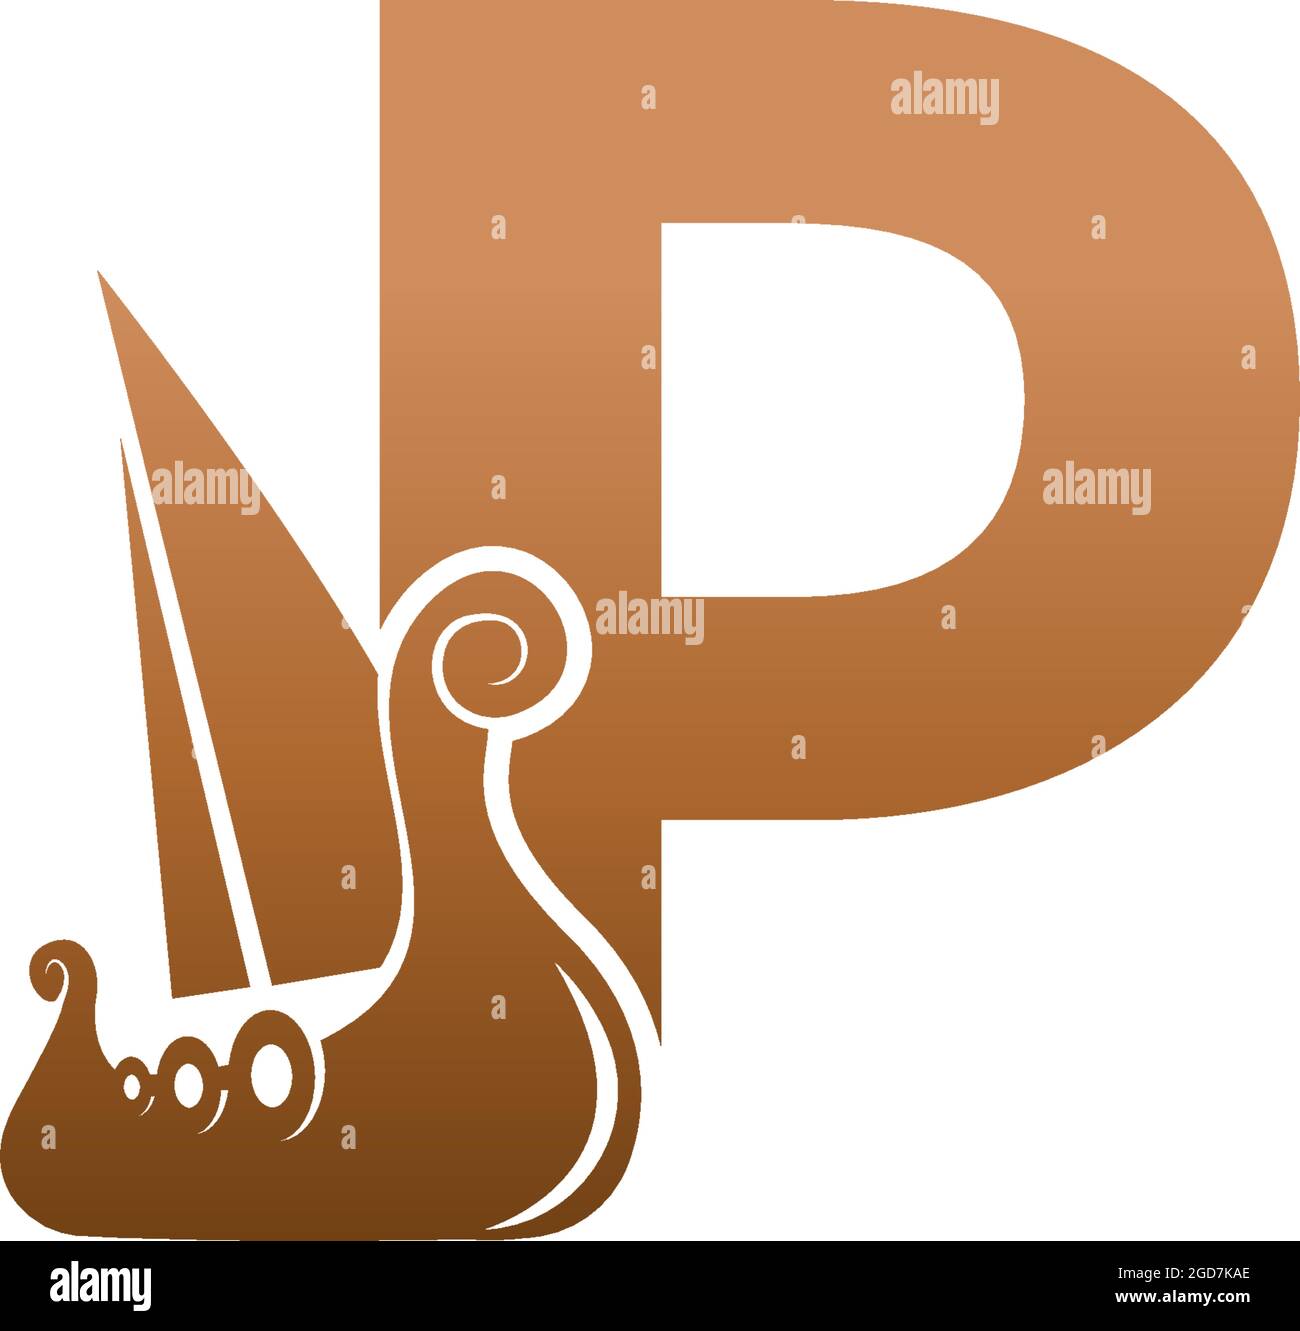 Letter P with logo icon viking sailboat design template illustration Stock Vector